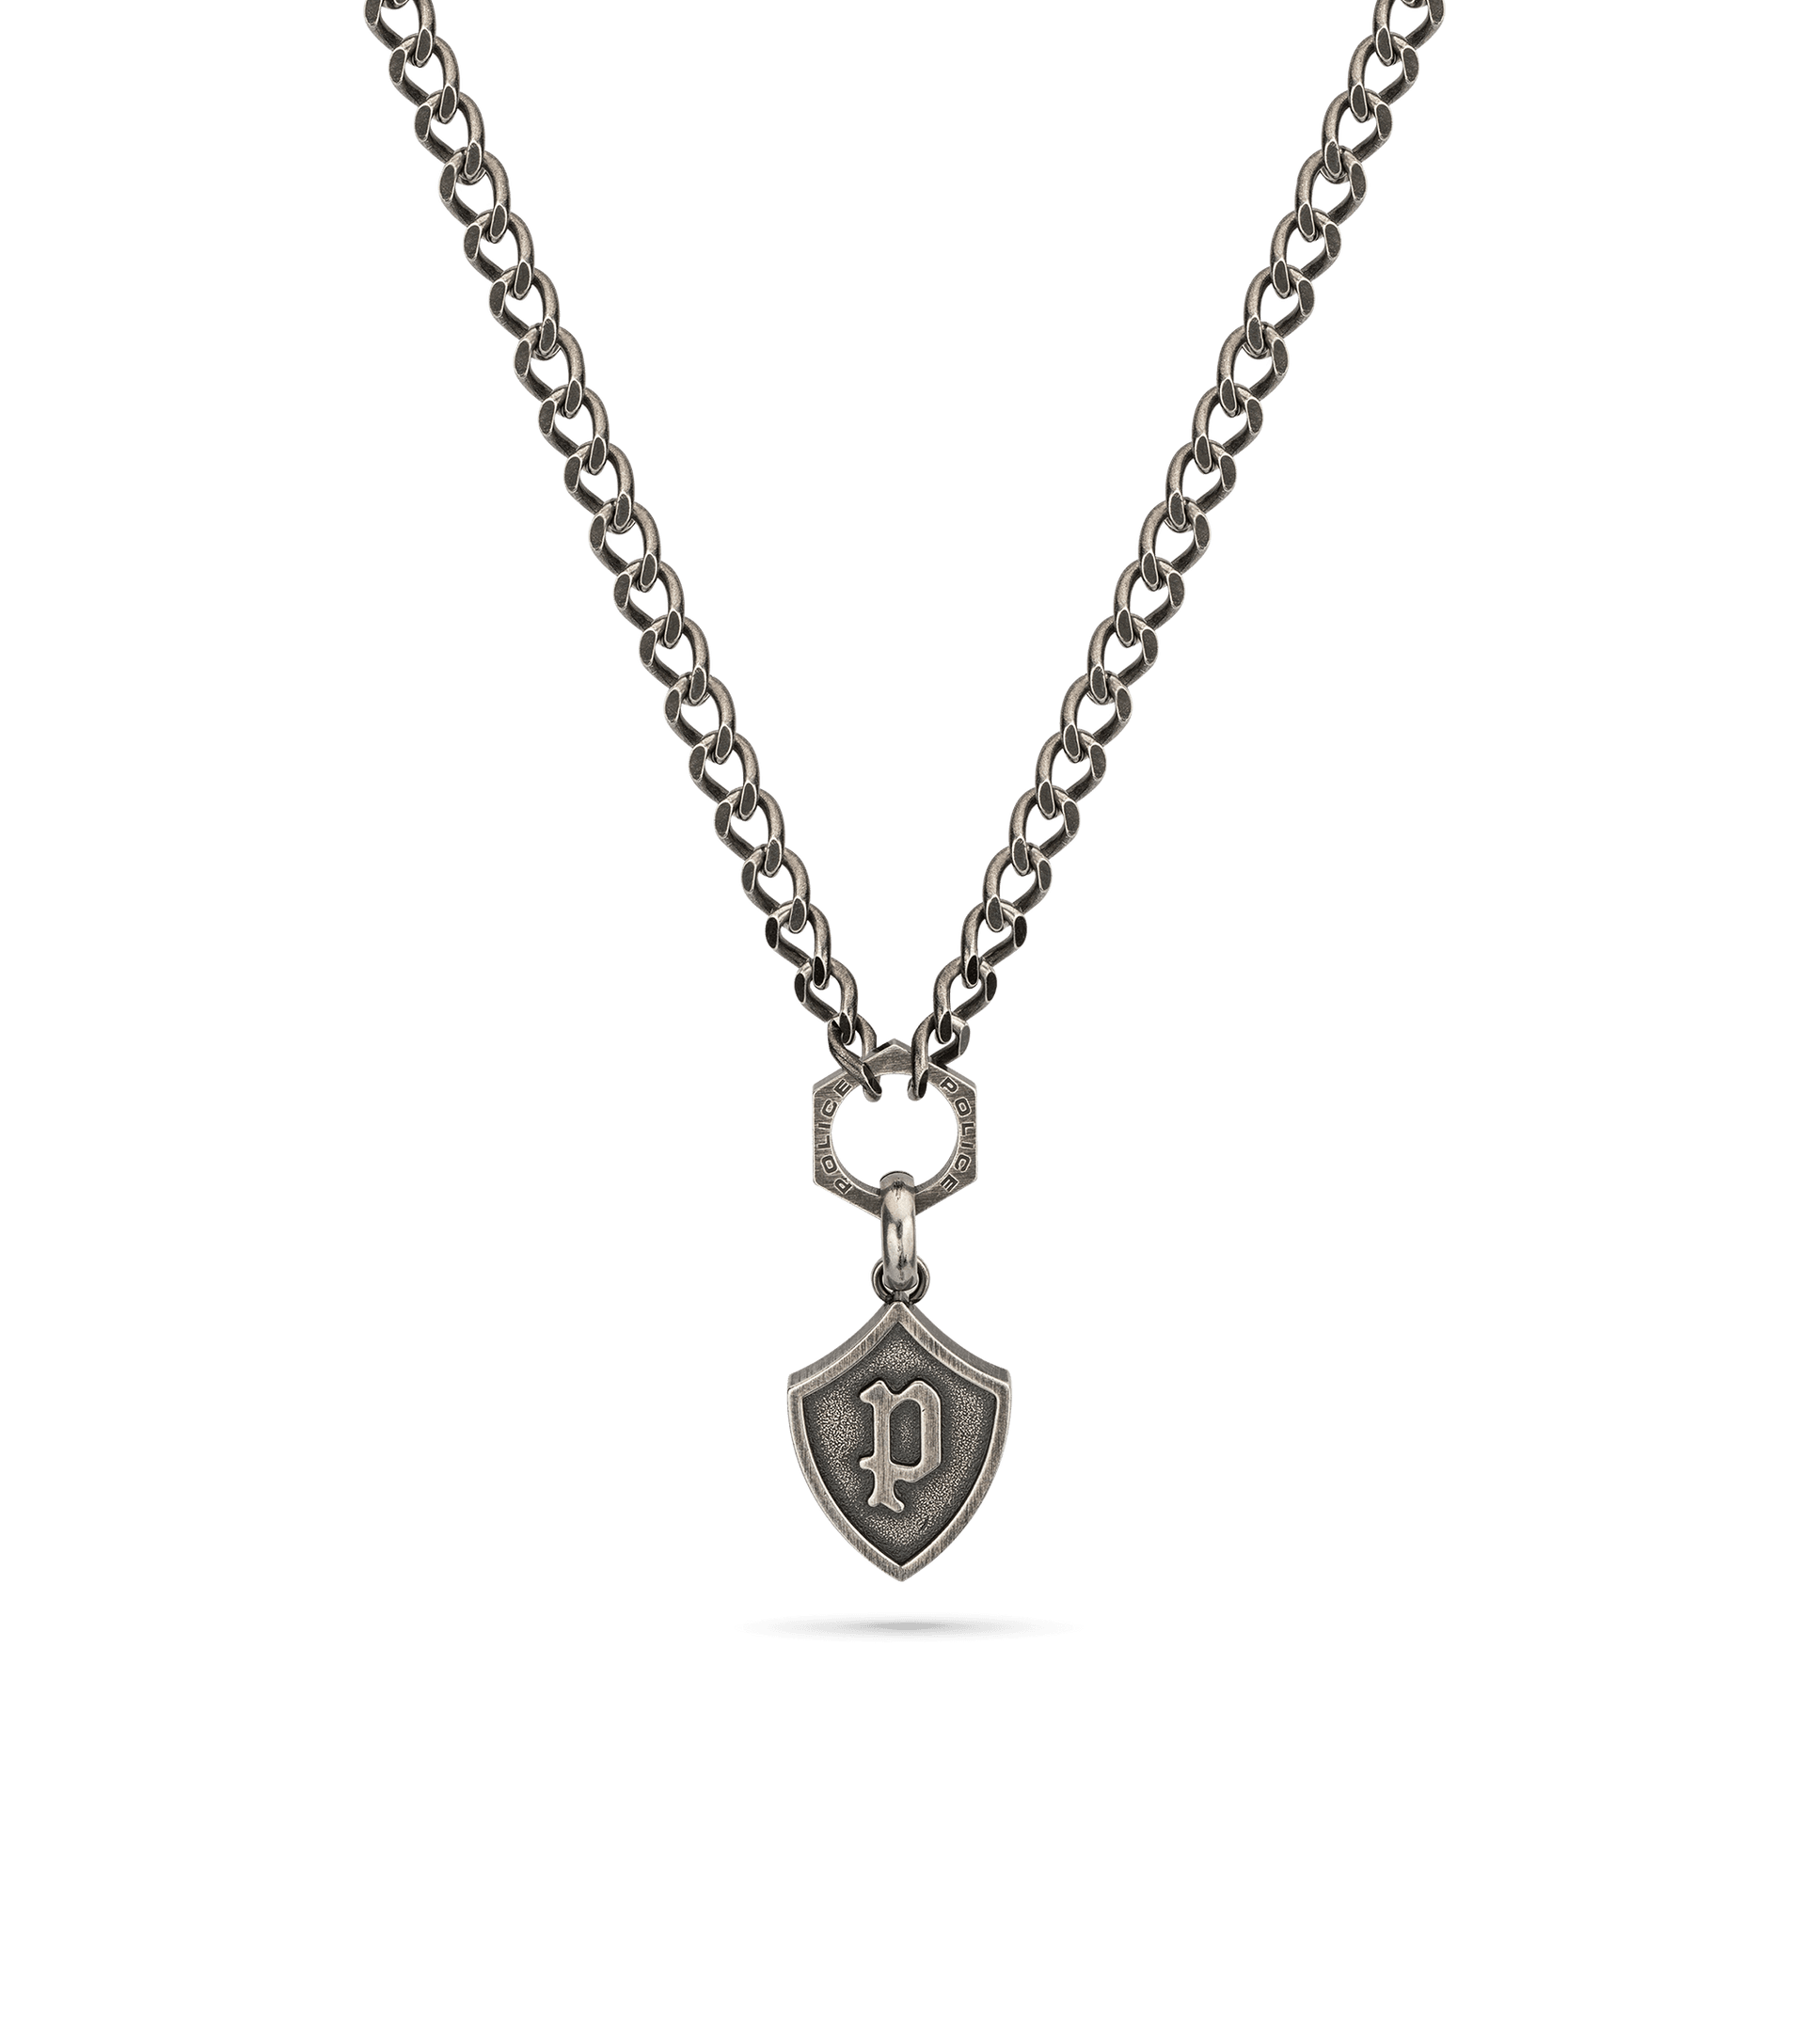 PEAGN2120211 Police Necklace Edge - By Police Tribal jewels For Men